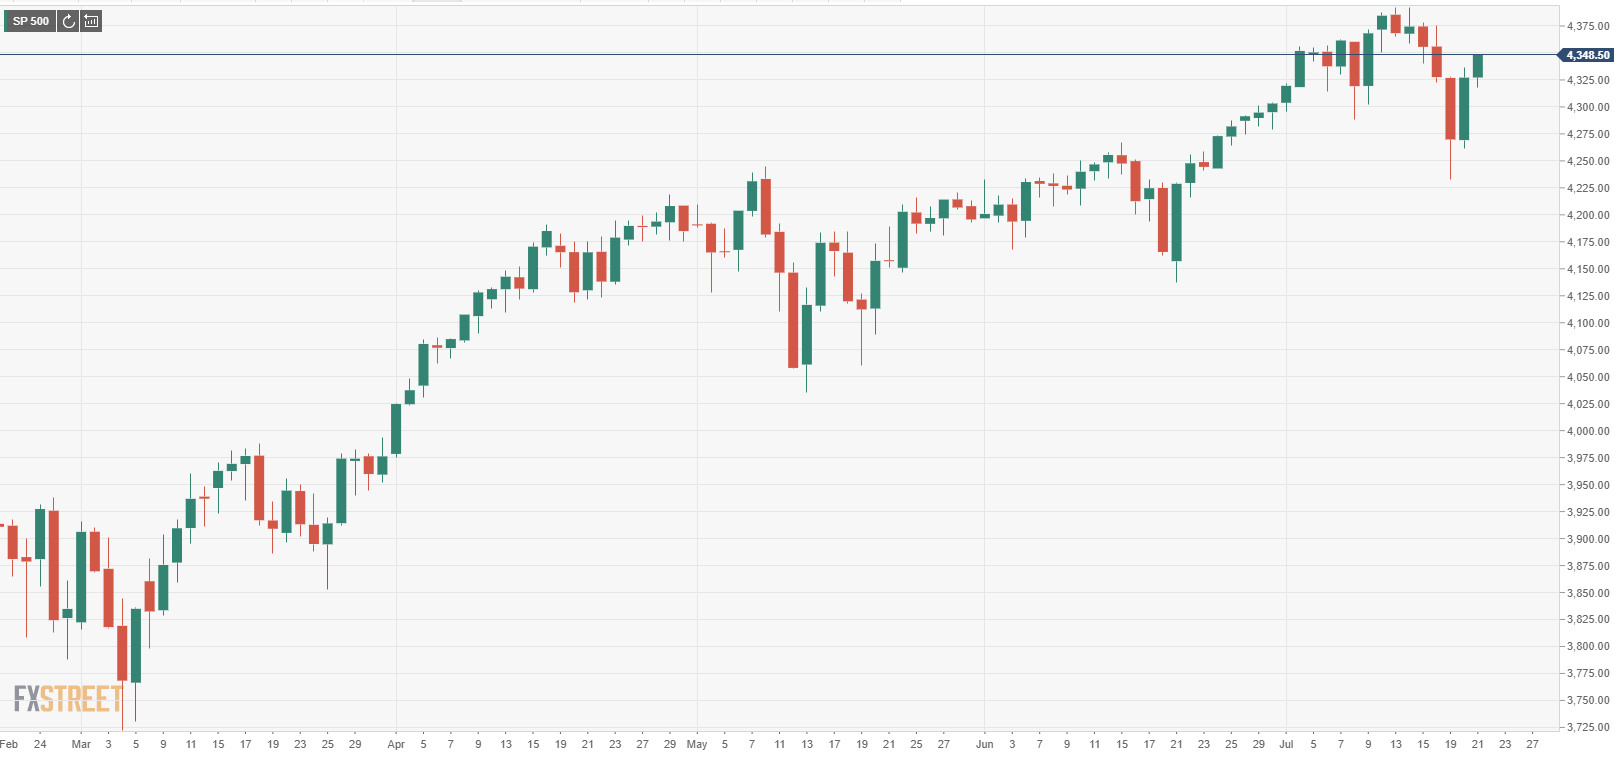 S&P 500 Index opens modestly higher after Tuesday’s rally